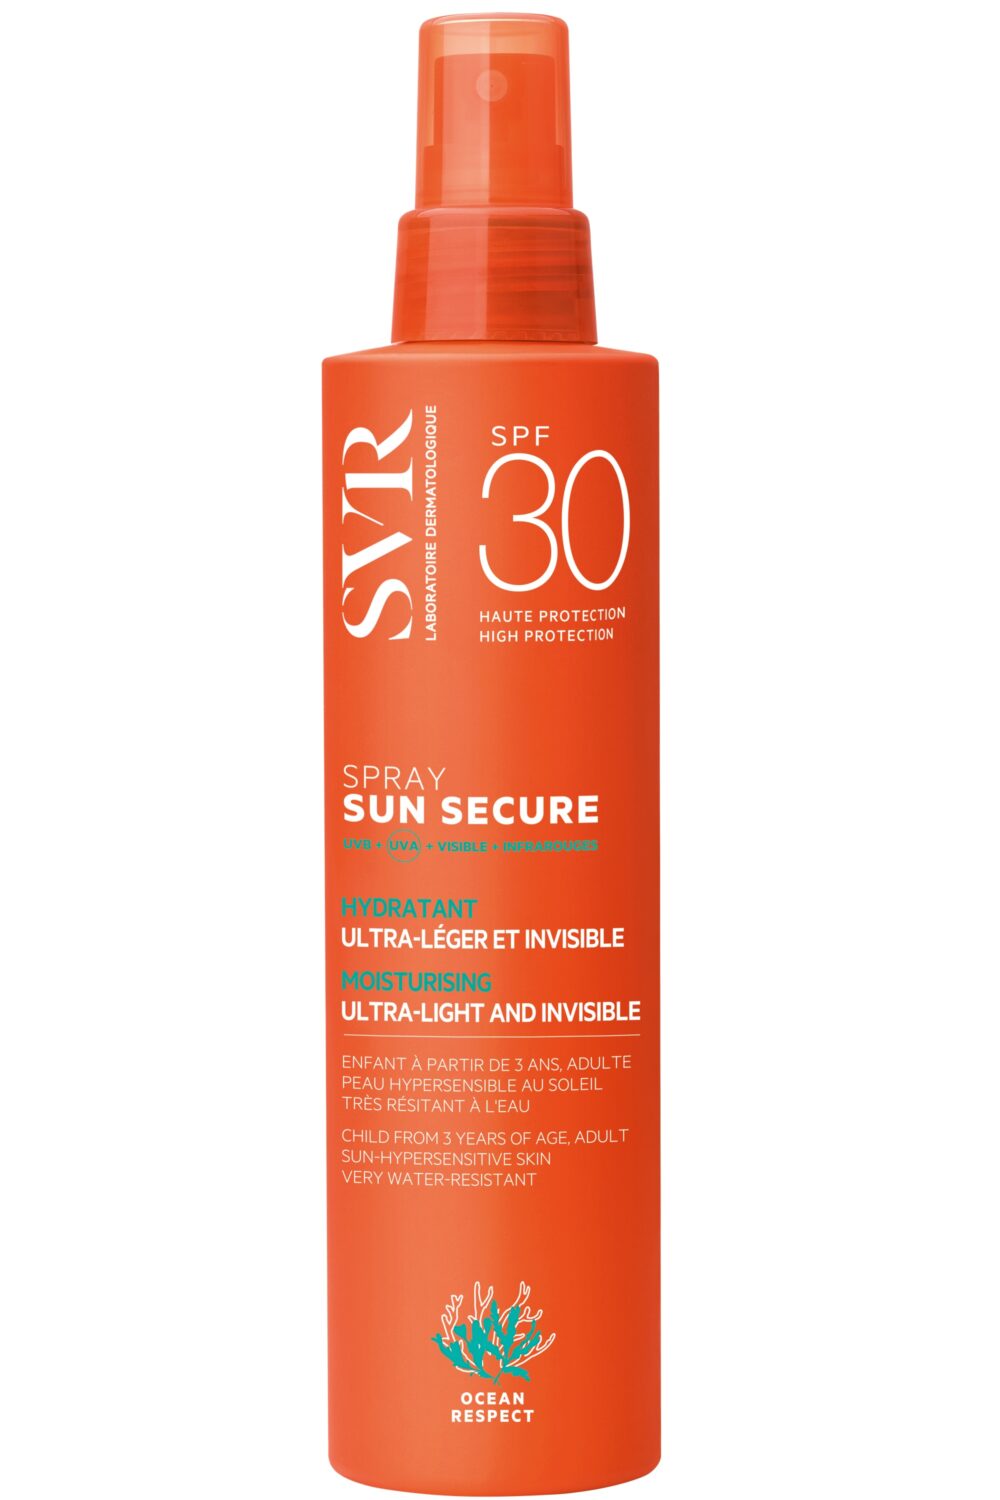 SVR - Spray solaire hydratant ultra-léger et invisible SPF30